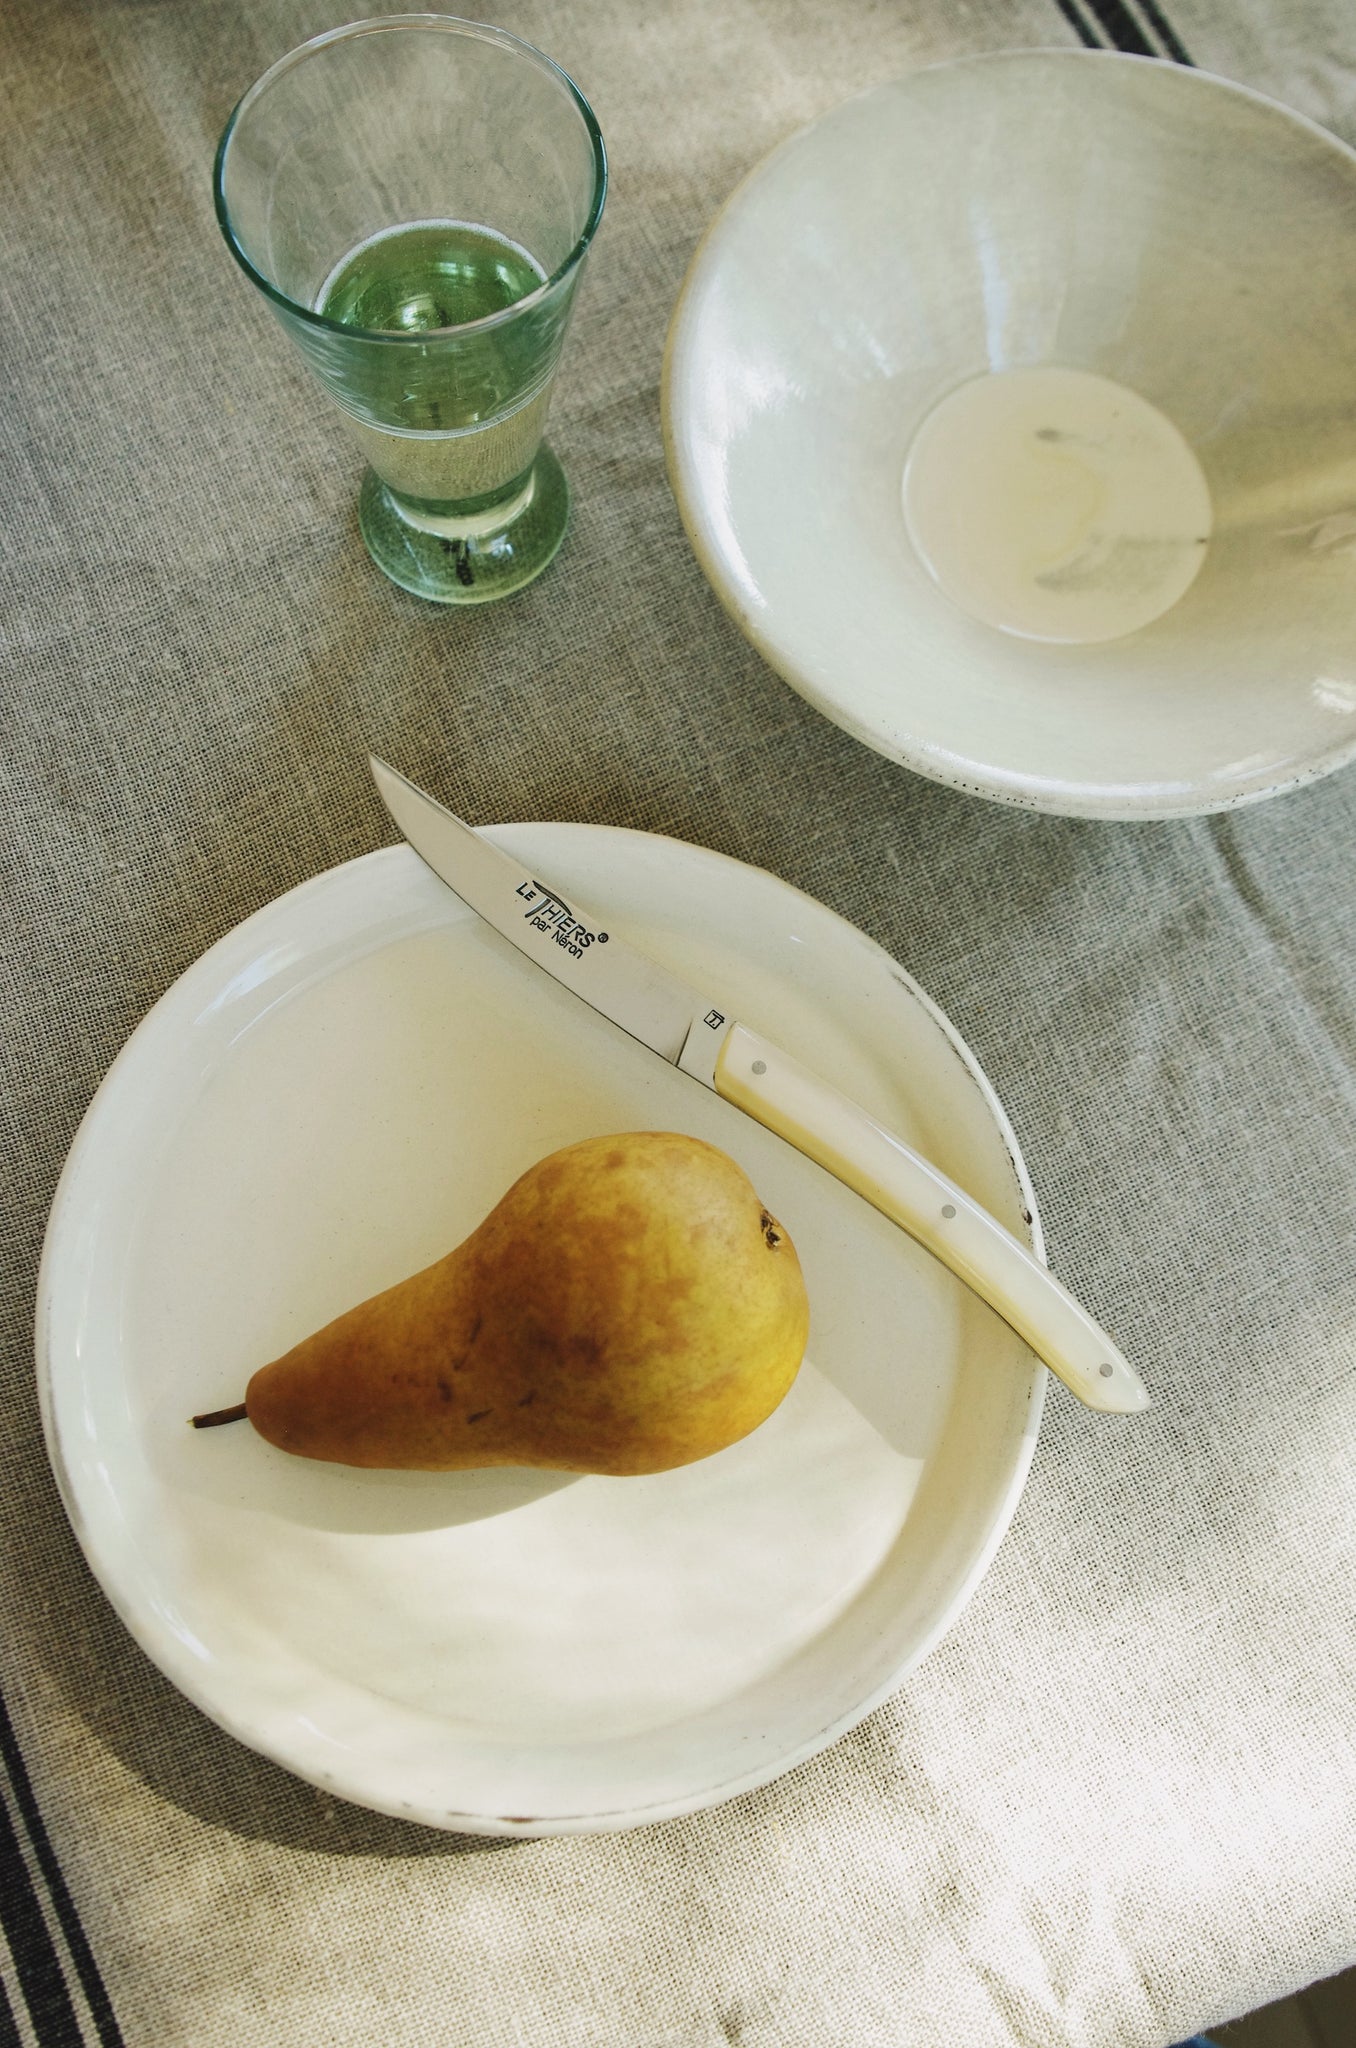 Small knife with cream handle next to pear on a rustic white plate.